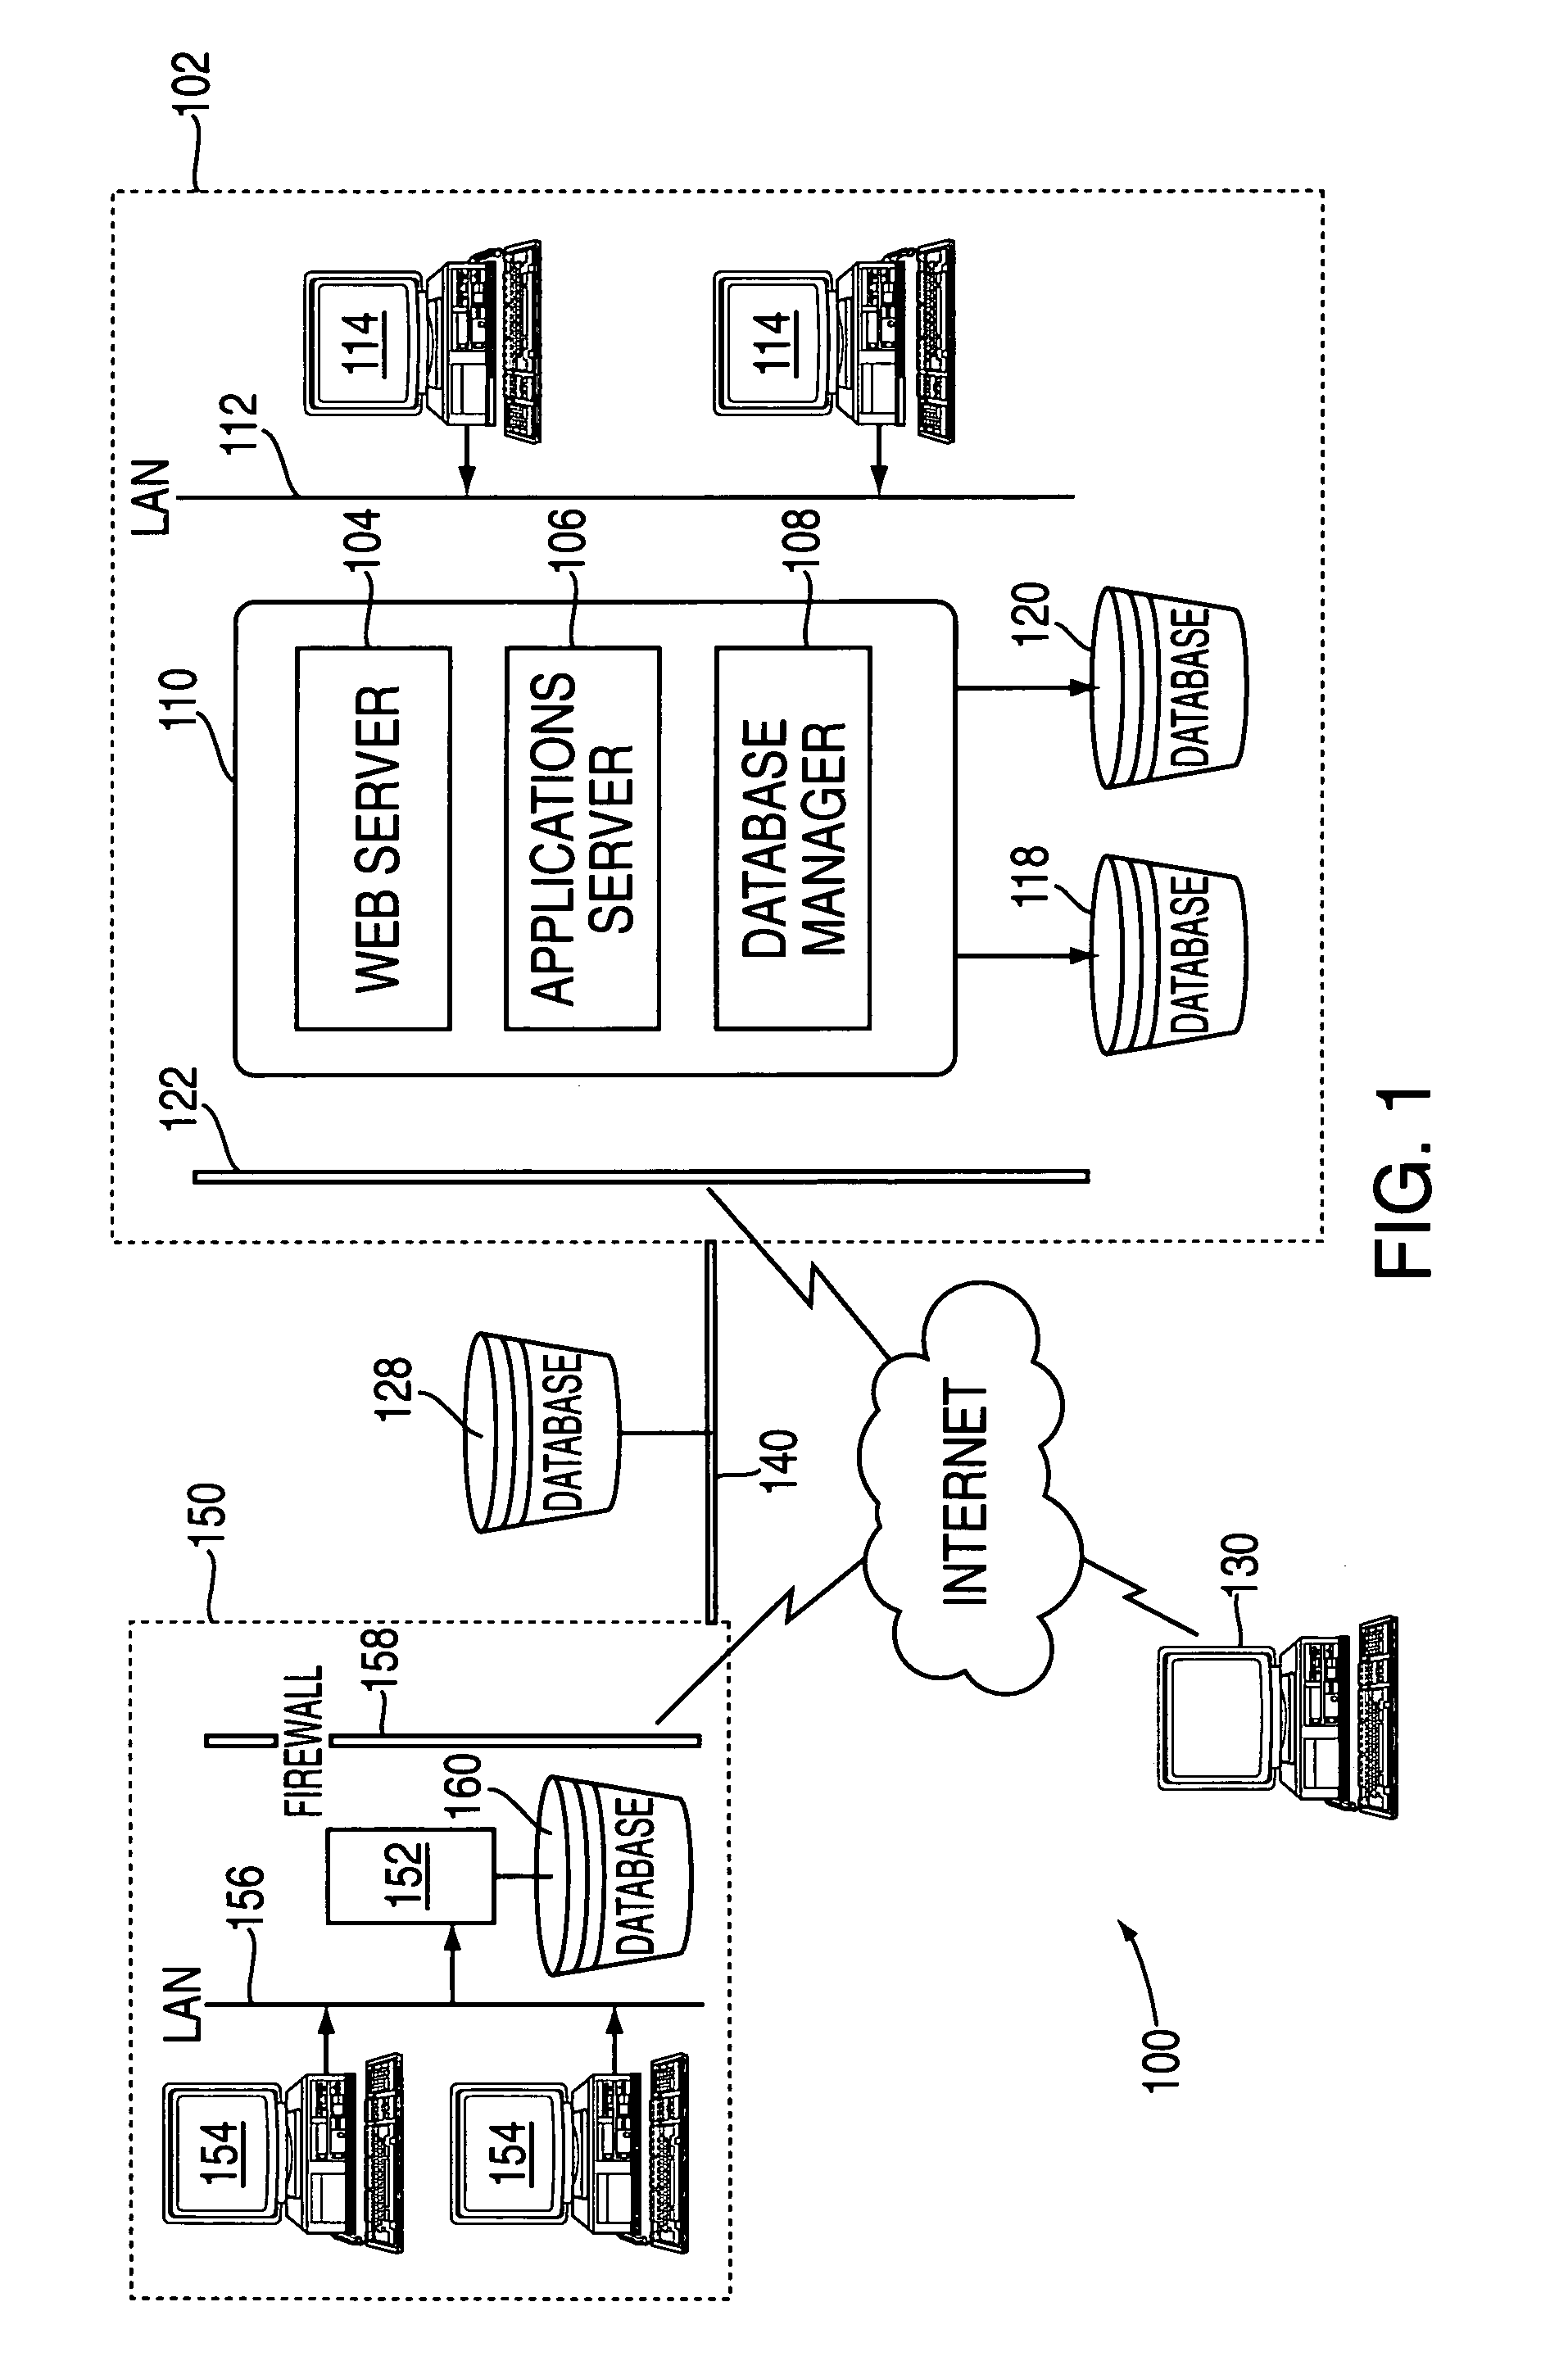 Method and system for dynamically providing materials and technology information